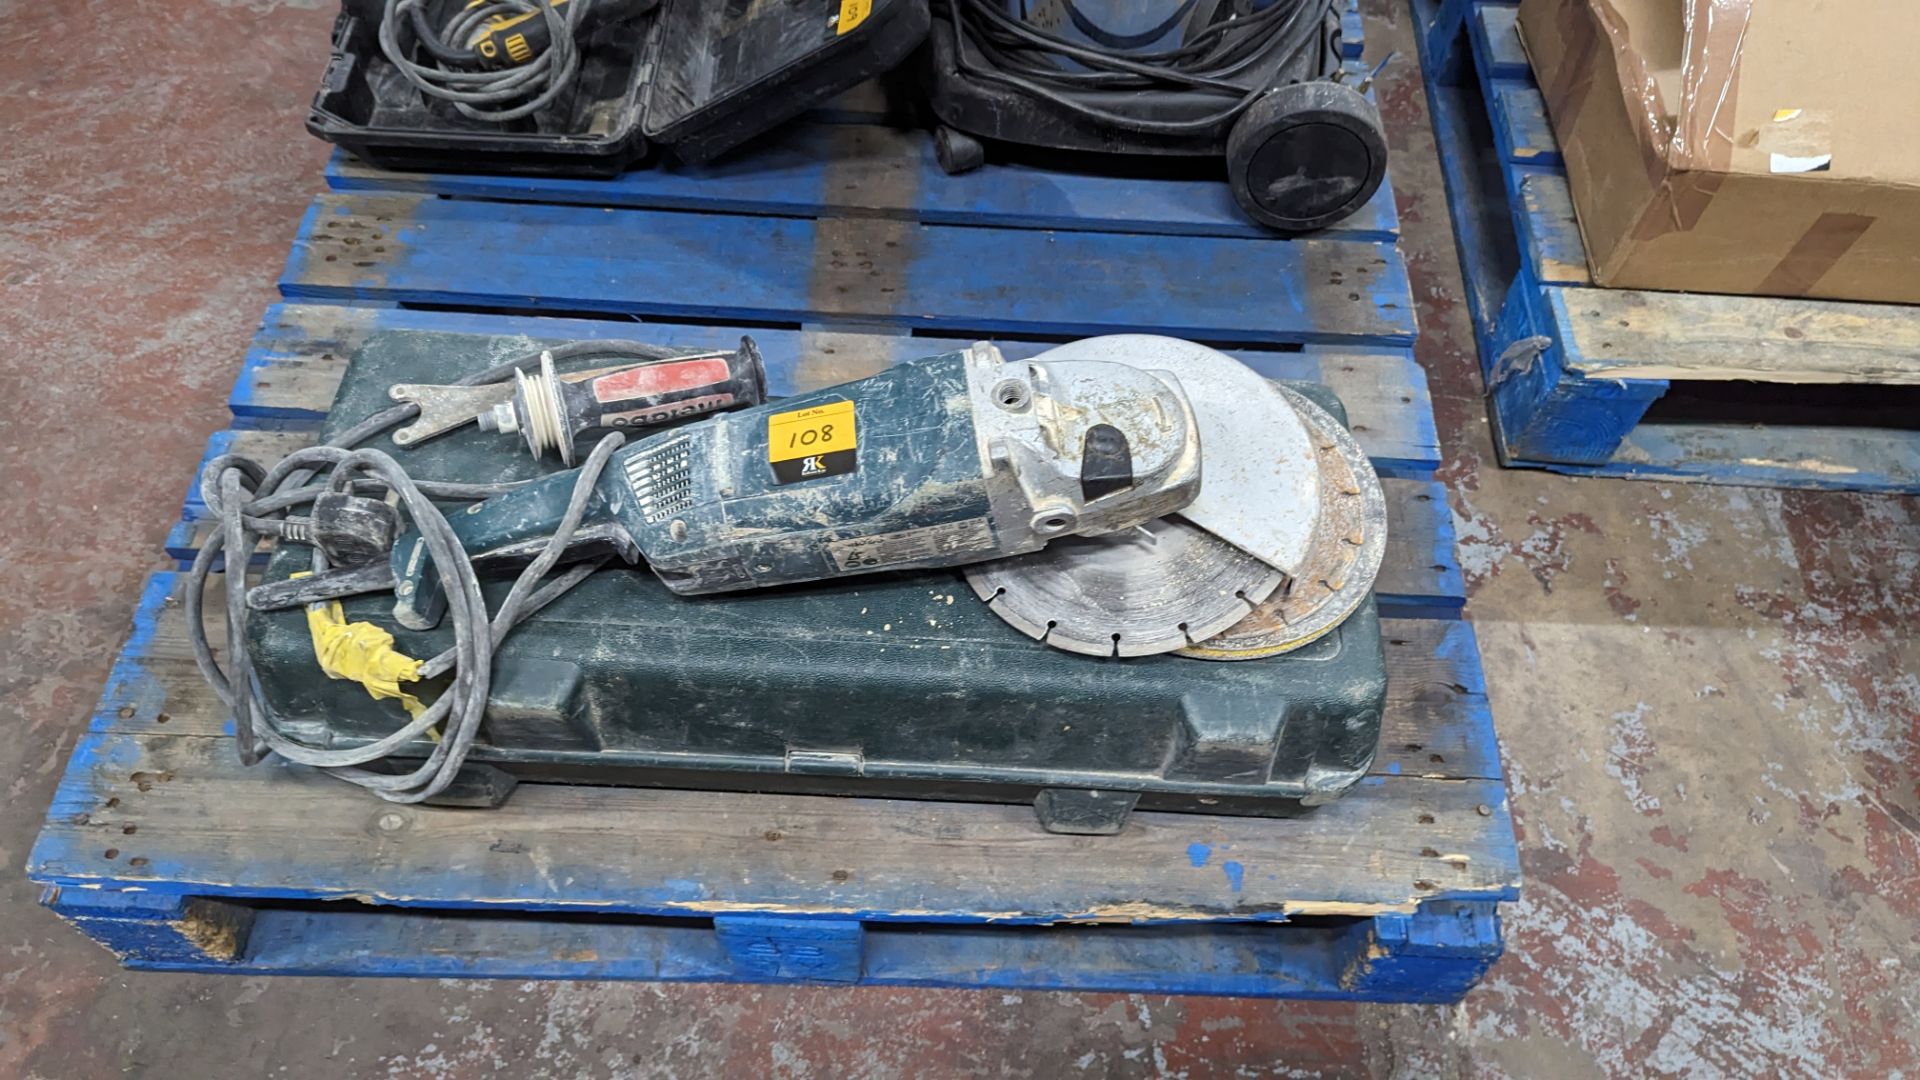 Metabo large heavy duty angle grinder in case